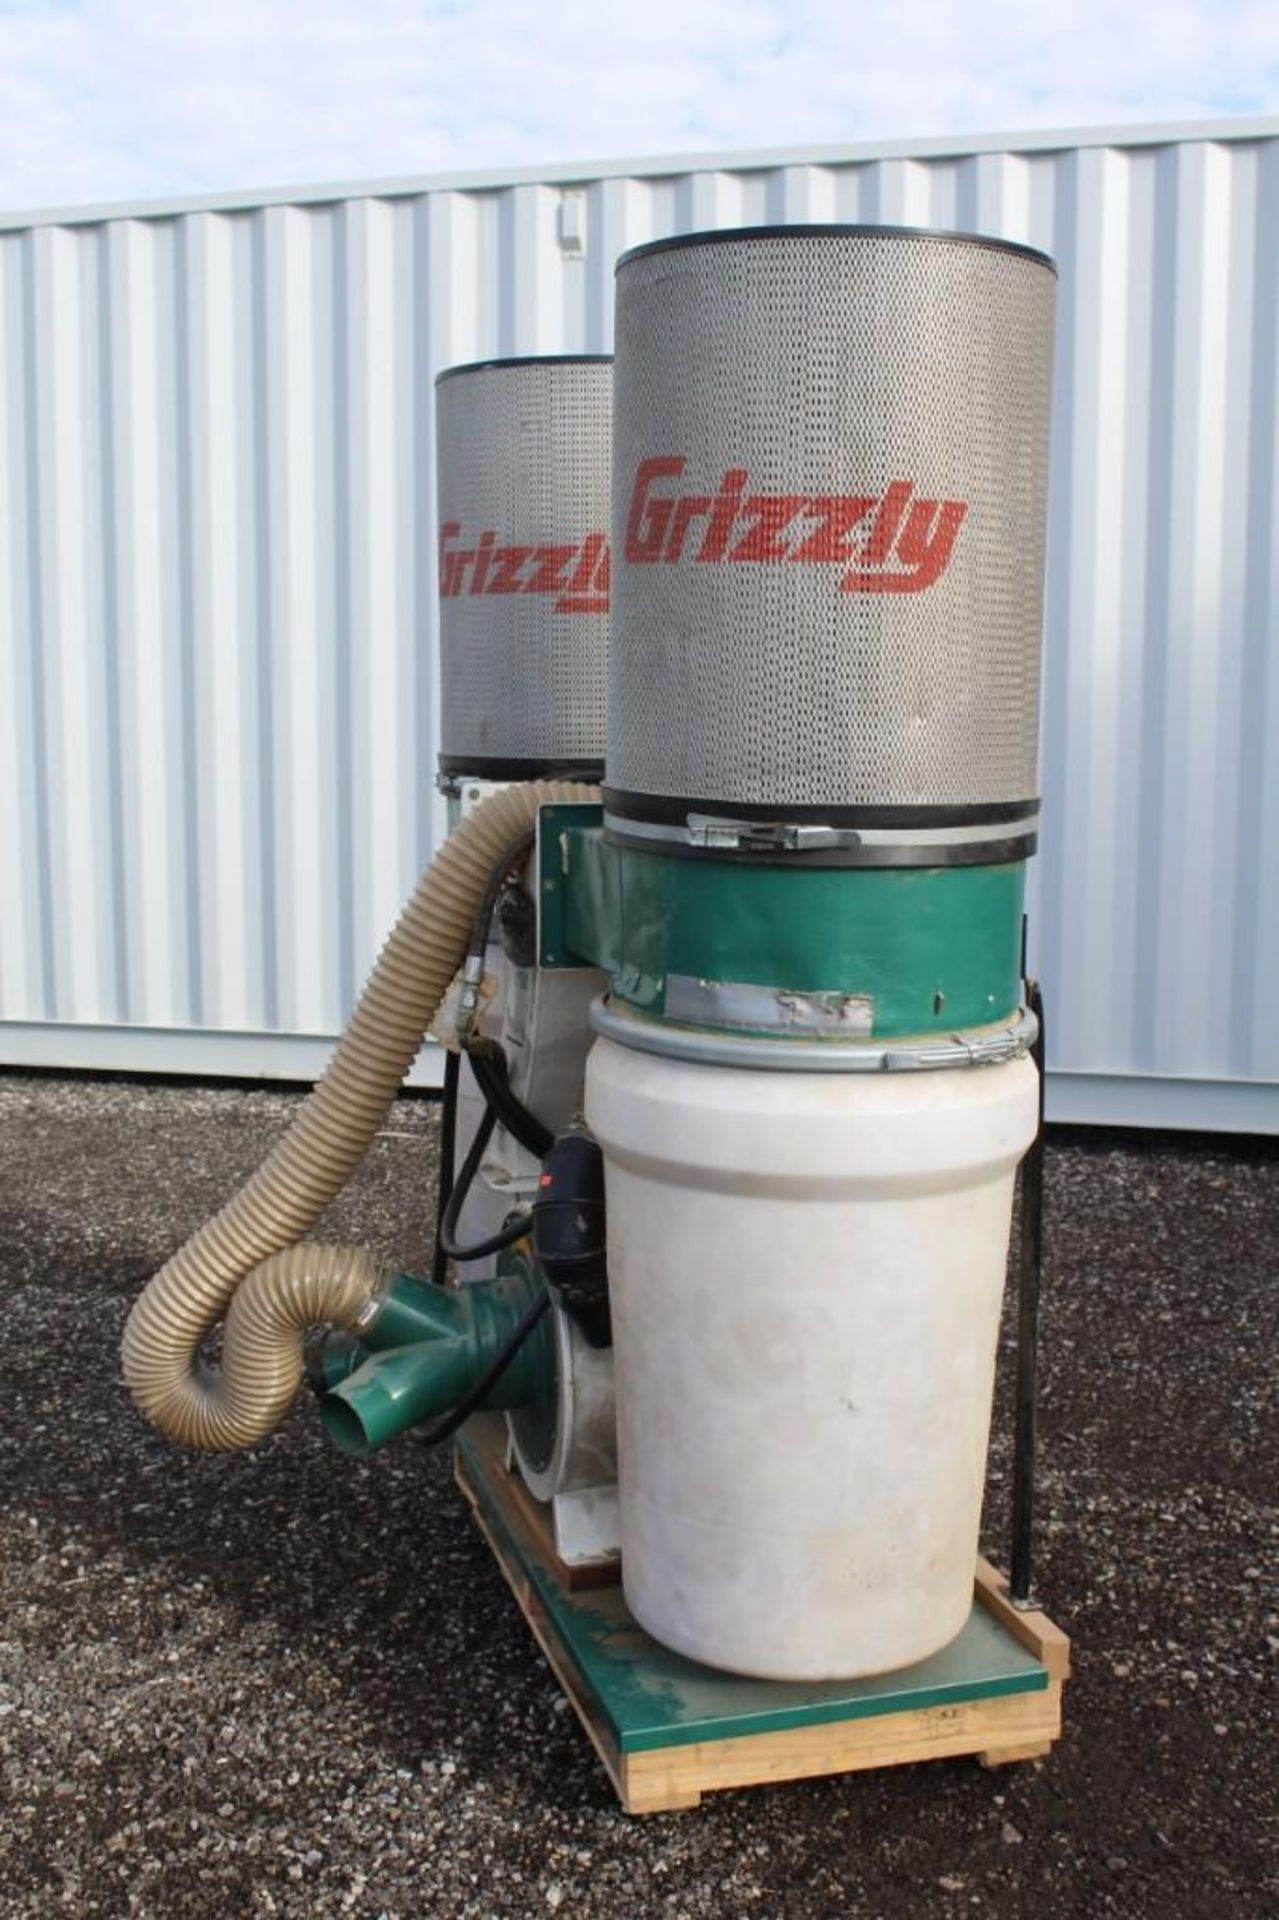 Grizzly Dust Collector - Image 2 of 5